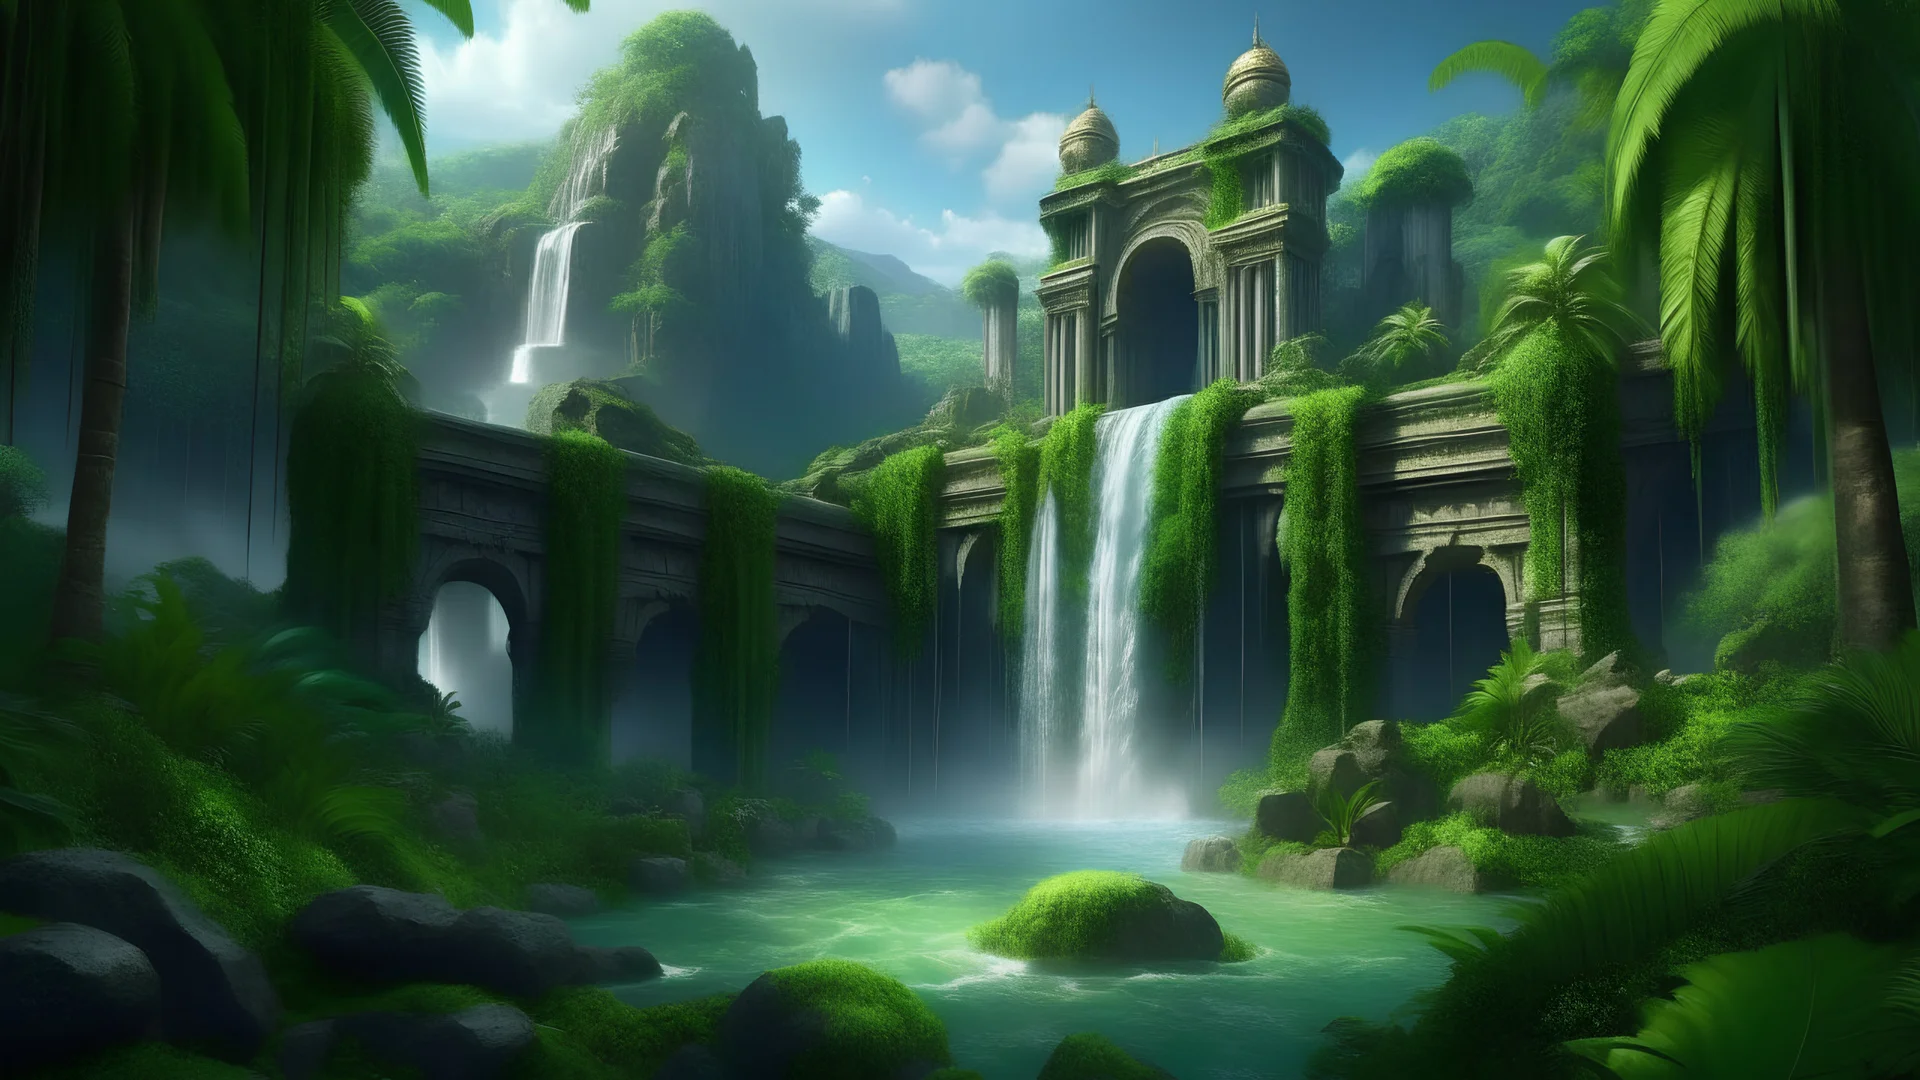 city lost ruins temple of jungle palms in the center of a lush garden surrounded by a band of waterfall that flows in The four rivers of fantasy art 3d